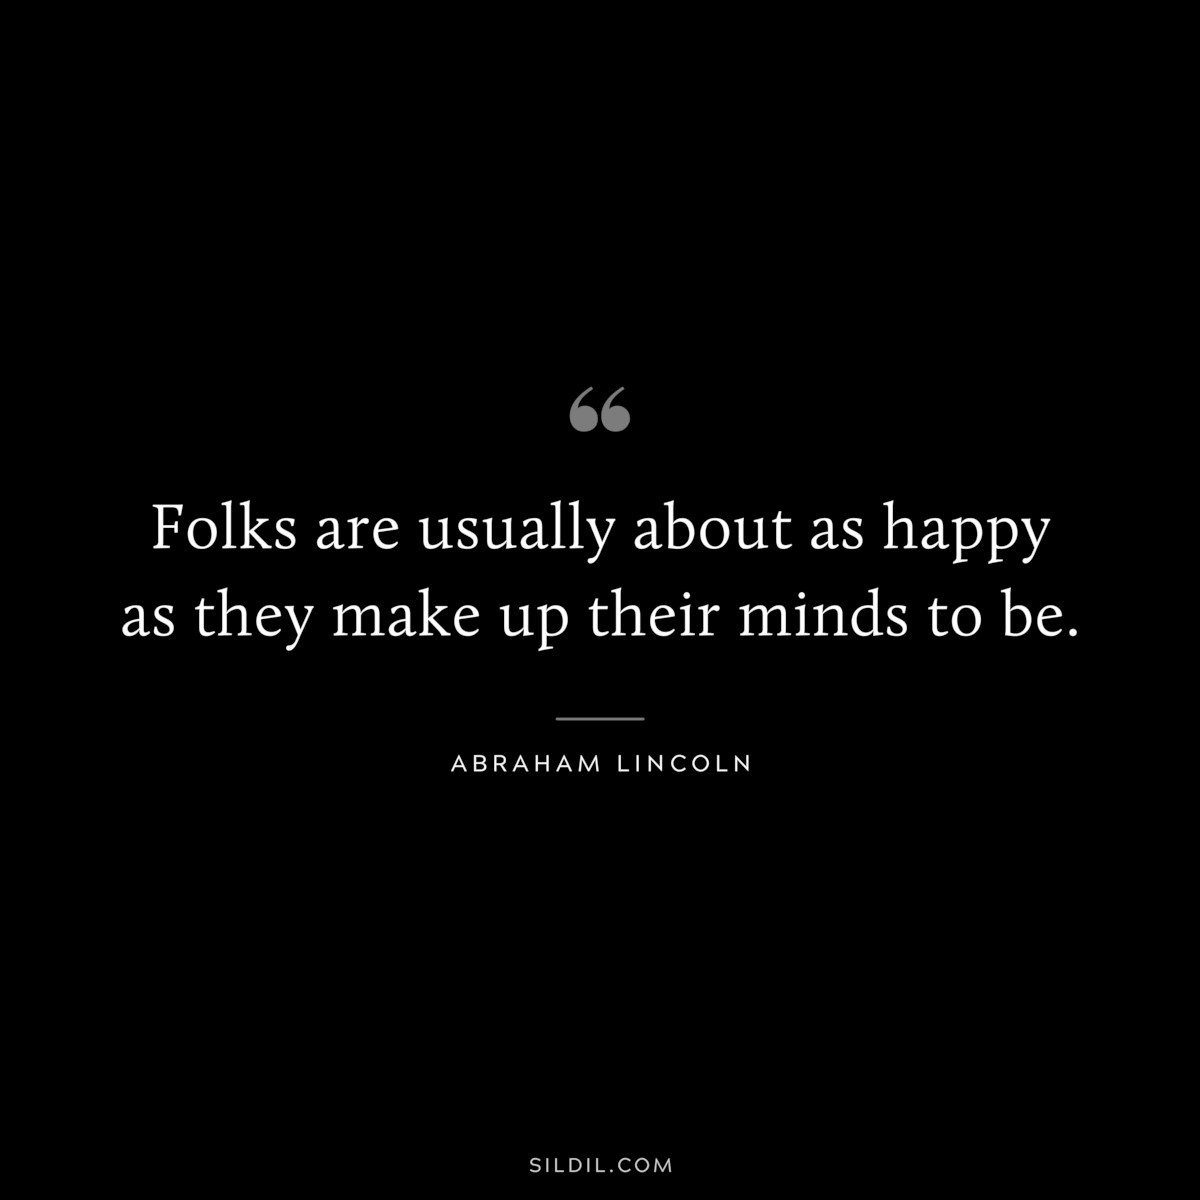 Folks are usually about as happy as they make up their minds to be. ― Abraham Lincoln